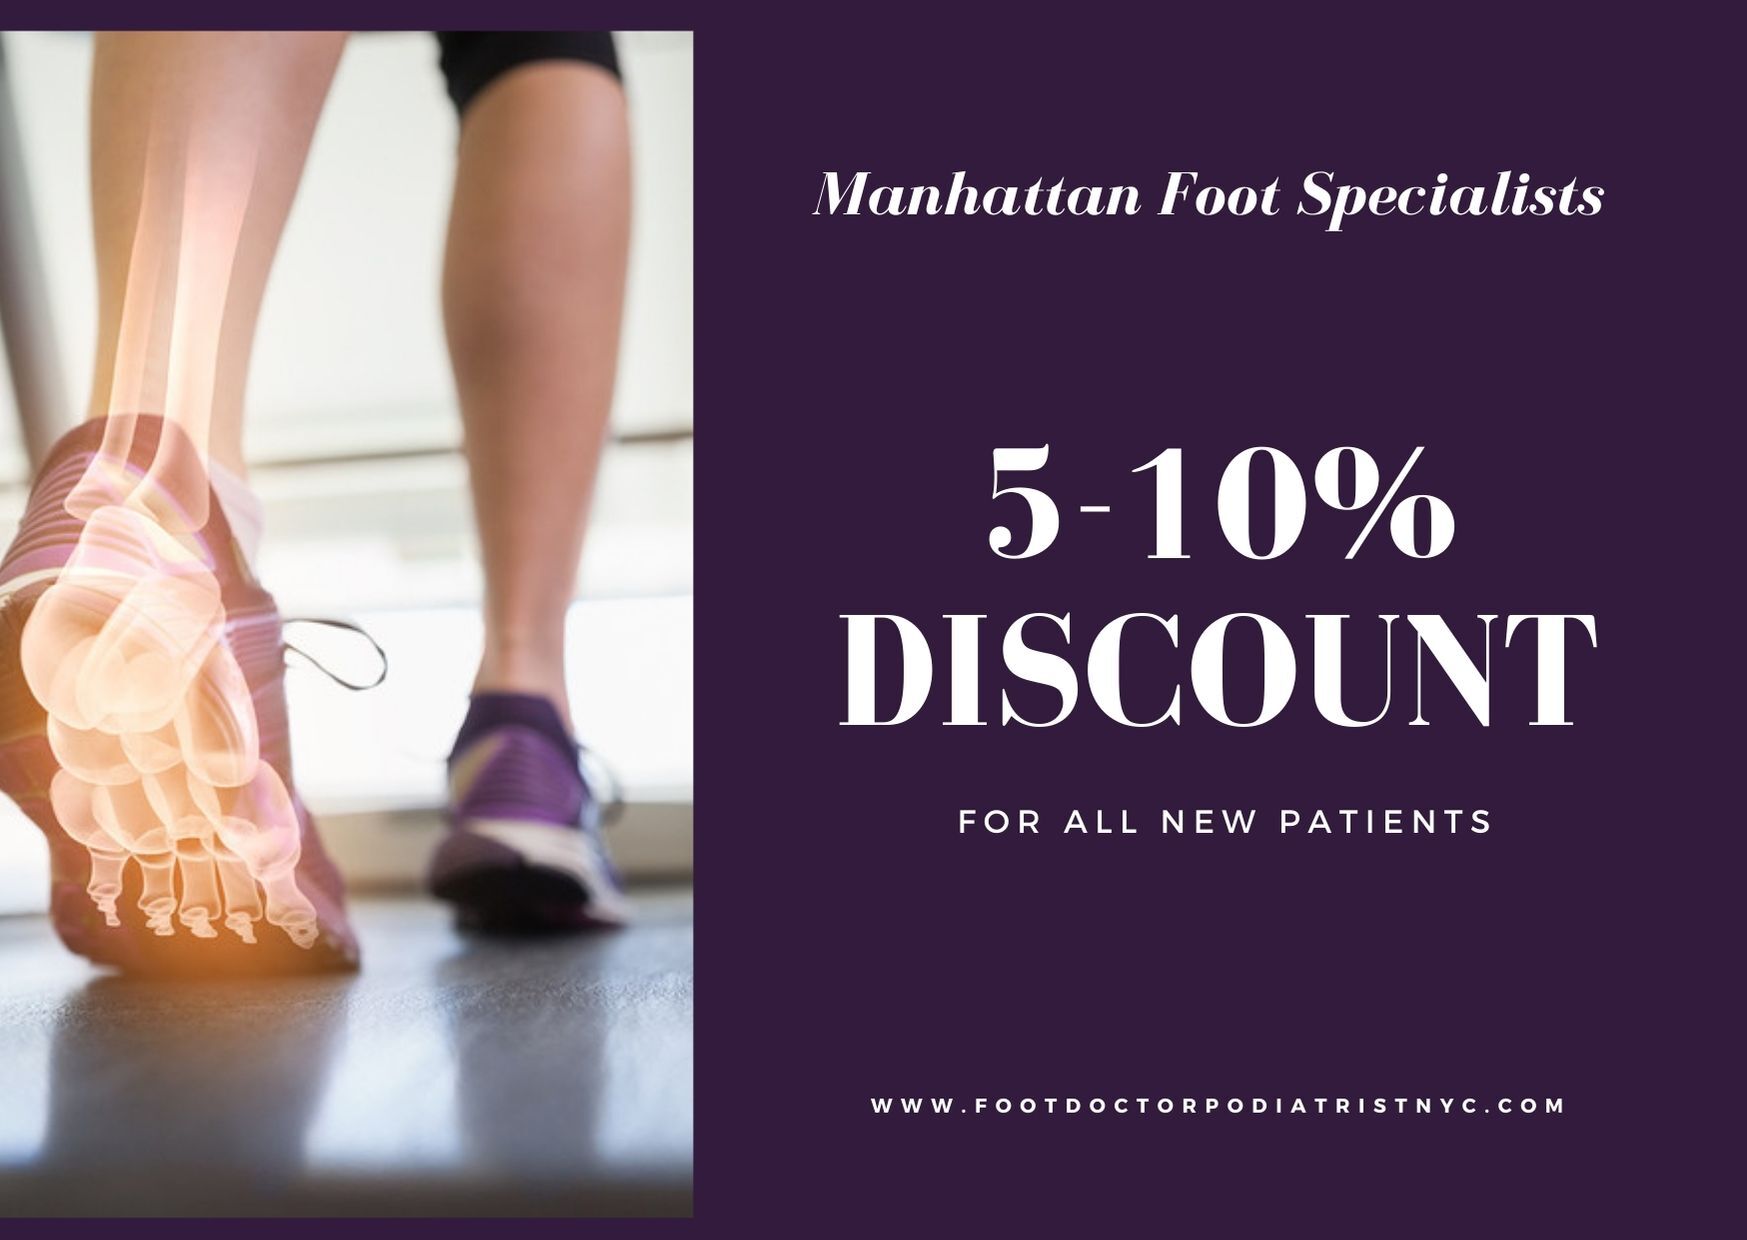 Manhattan Foot Specialists - New York, NY, US, foot doctor nyc